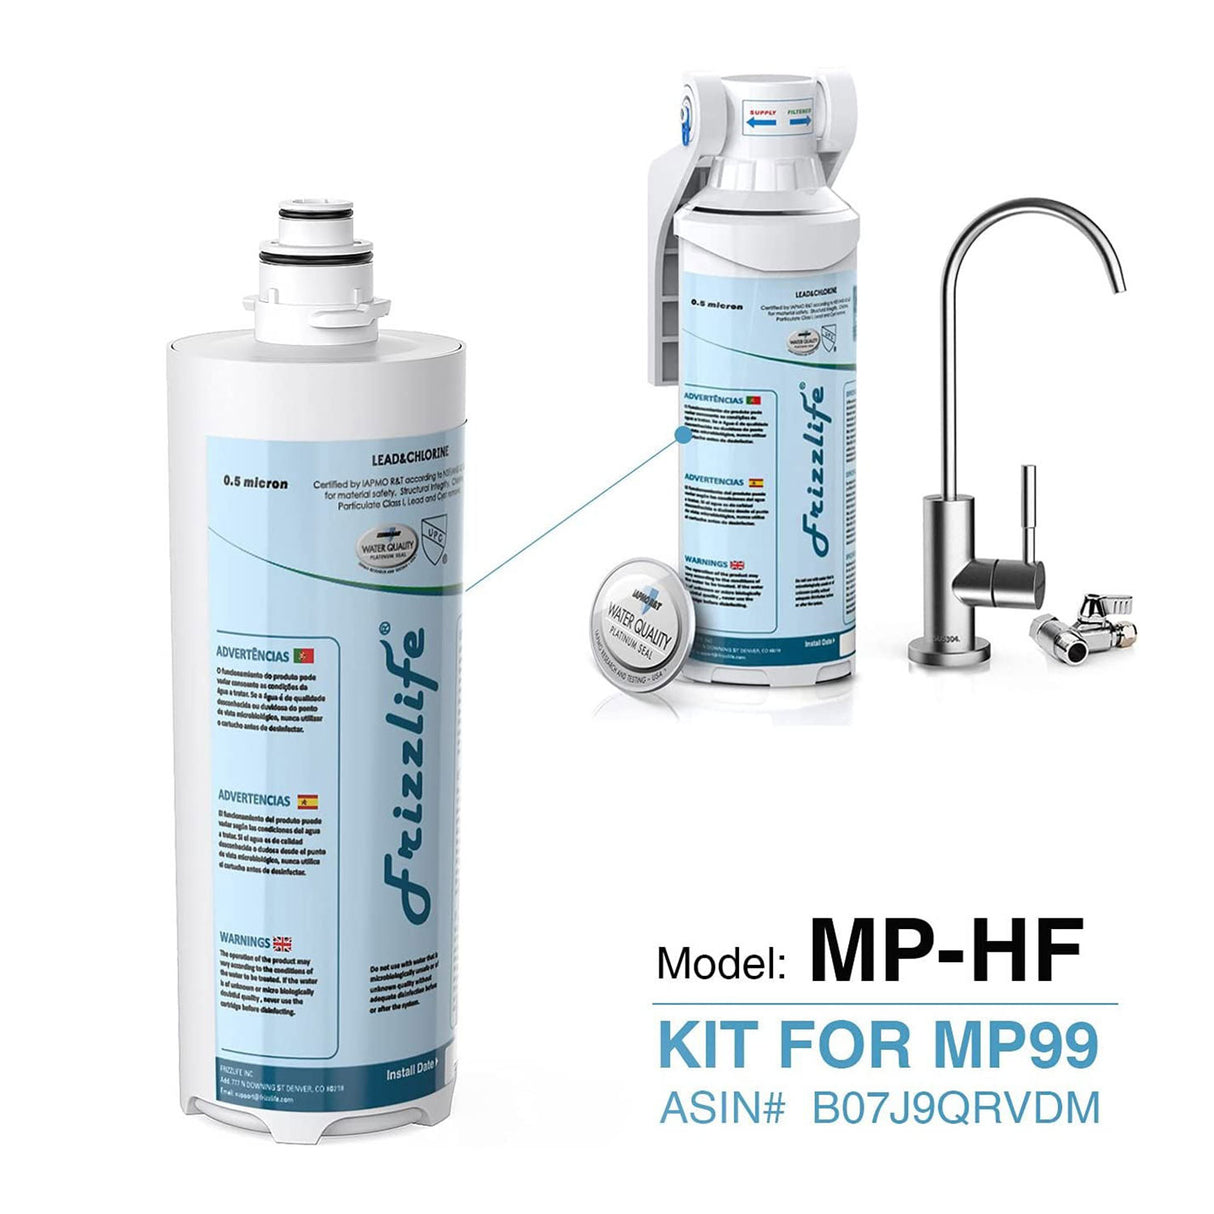 Frizzlife MP-HF Replacement Filter Cartridge Kit For MP99 - Includes Filter Cartridge and Filter Housing